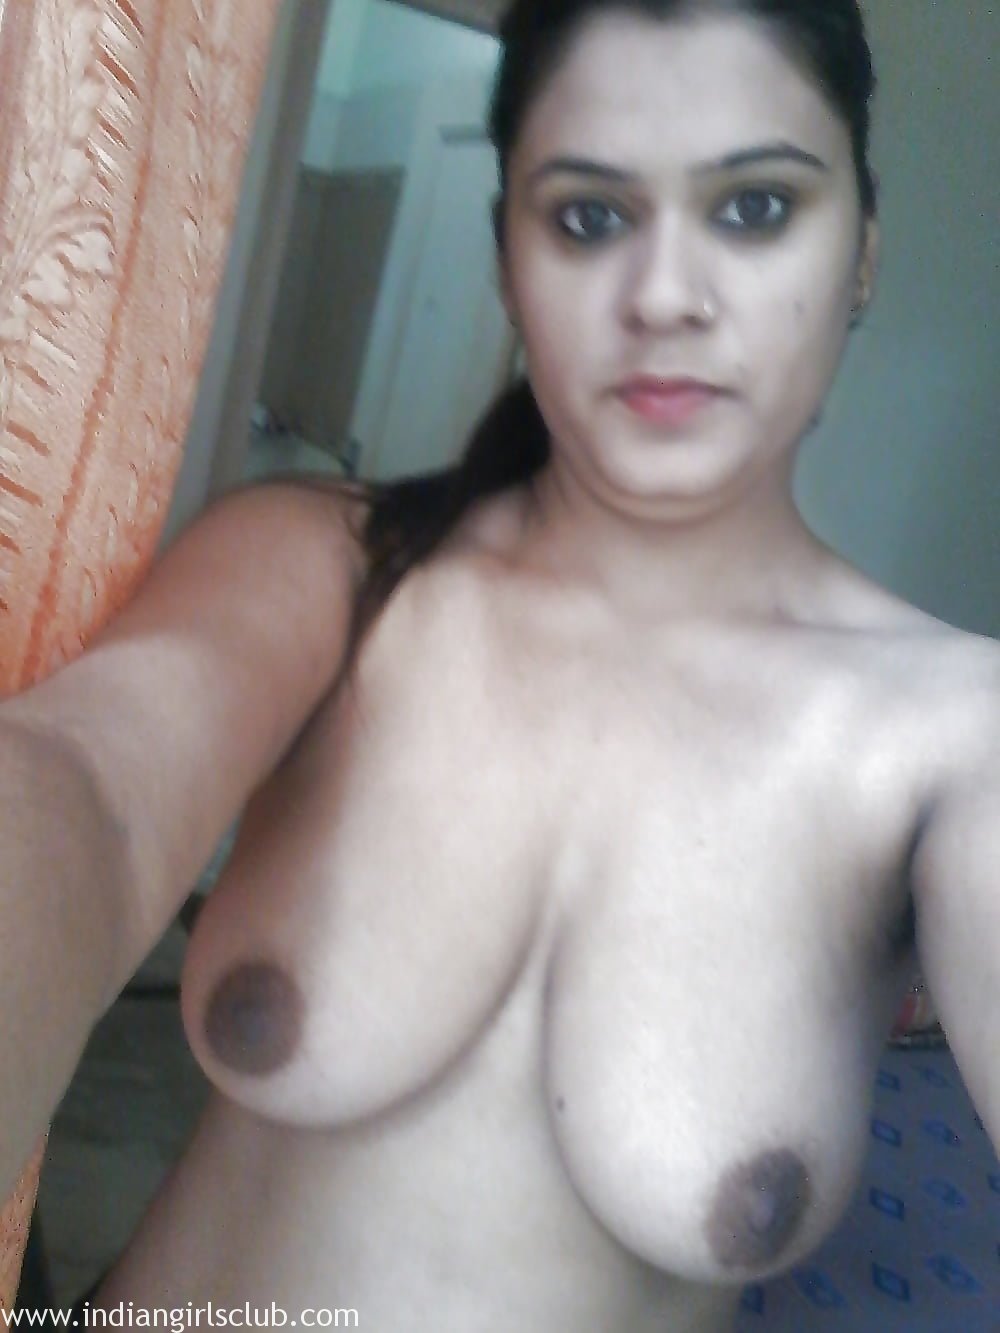 Collage Naked Indian Babes - nude-indian-college-girl-8 - Indian Girls Club - Nude Indian Girls & Hot Sexy  Indian Babes